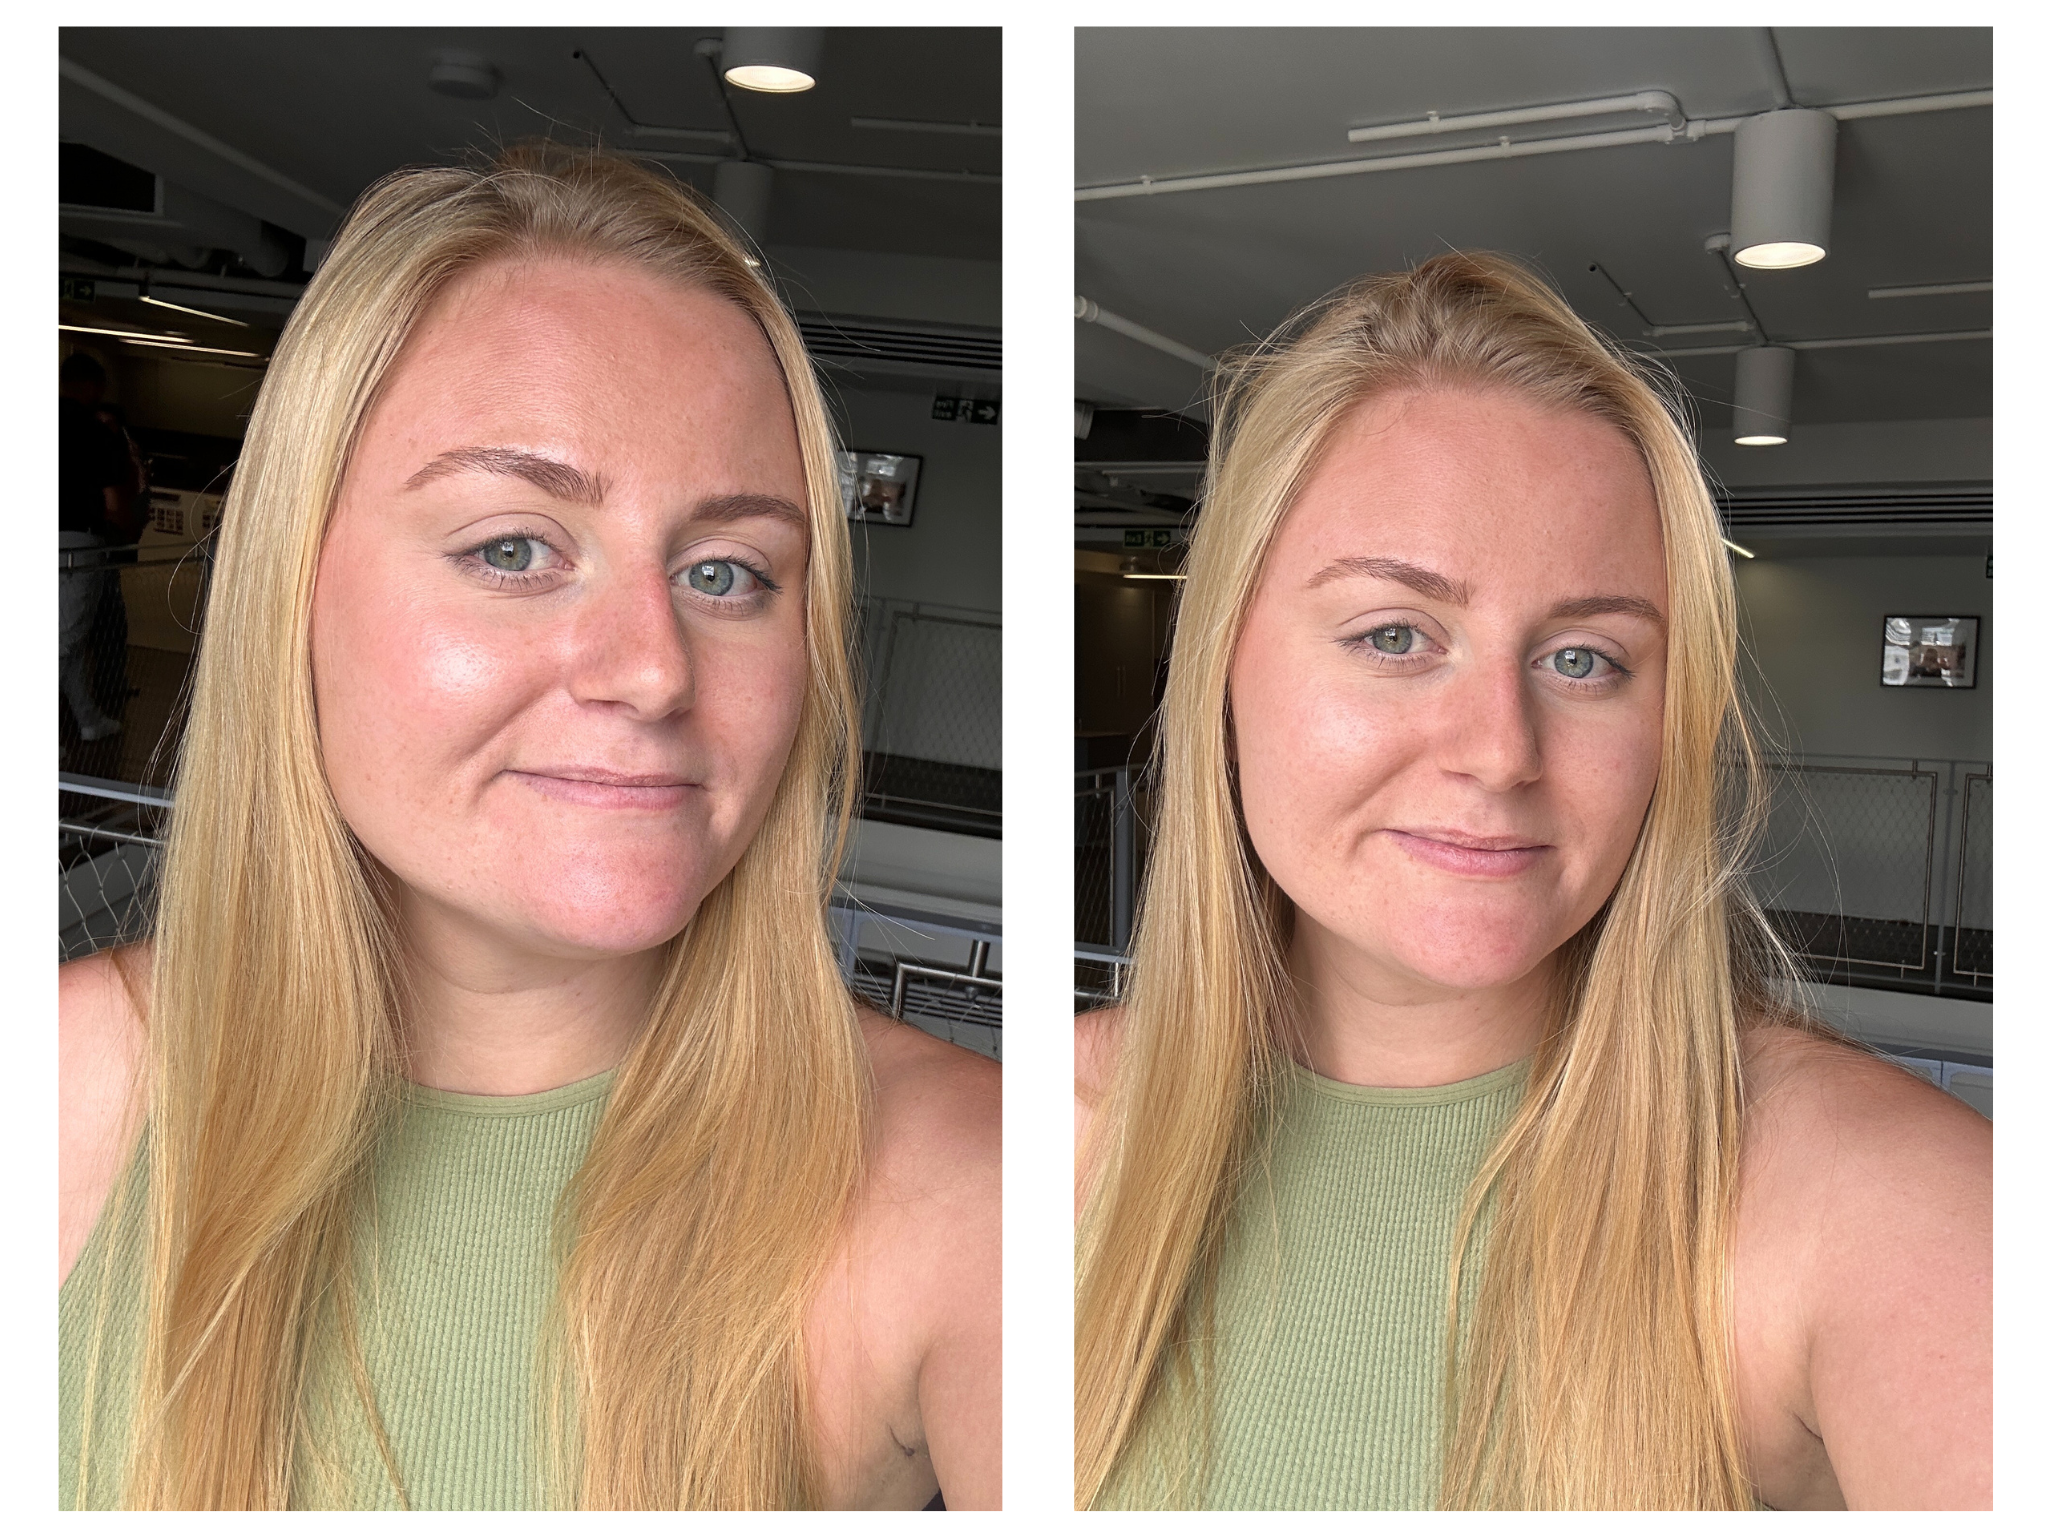 The state of my skin and its shine around midday (left) and then immediately after applying the all nighter powder (right)